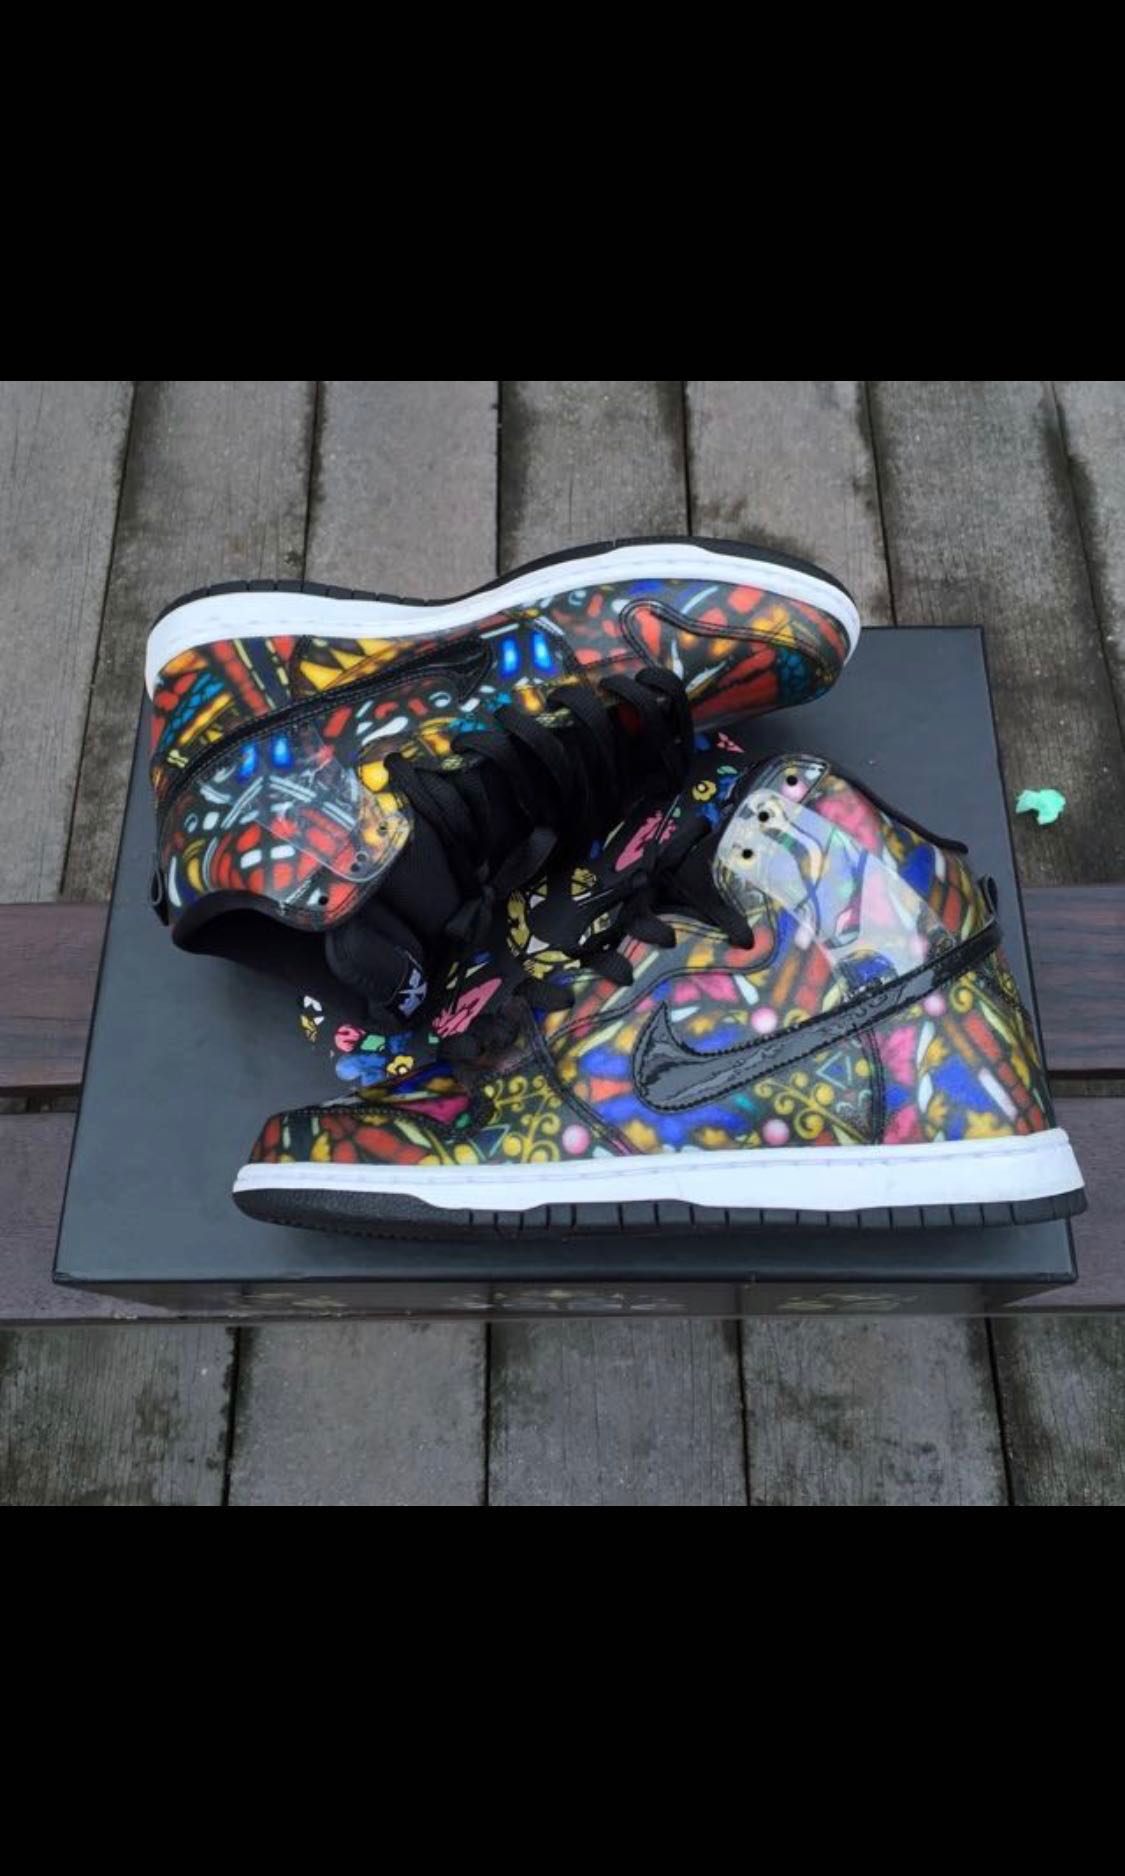 stained glass sb dunks